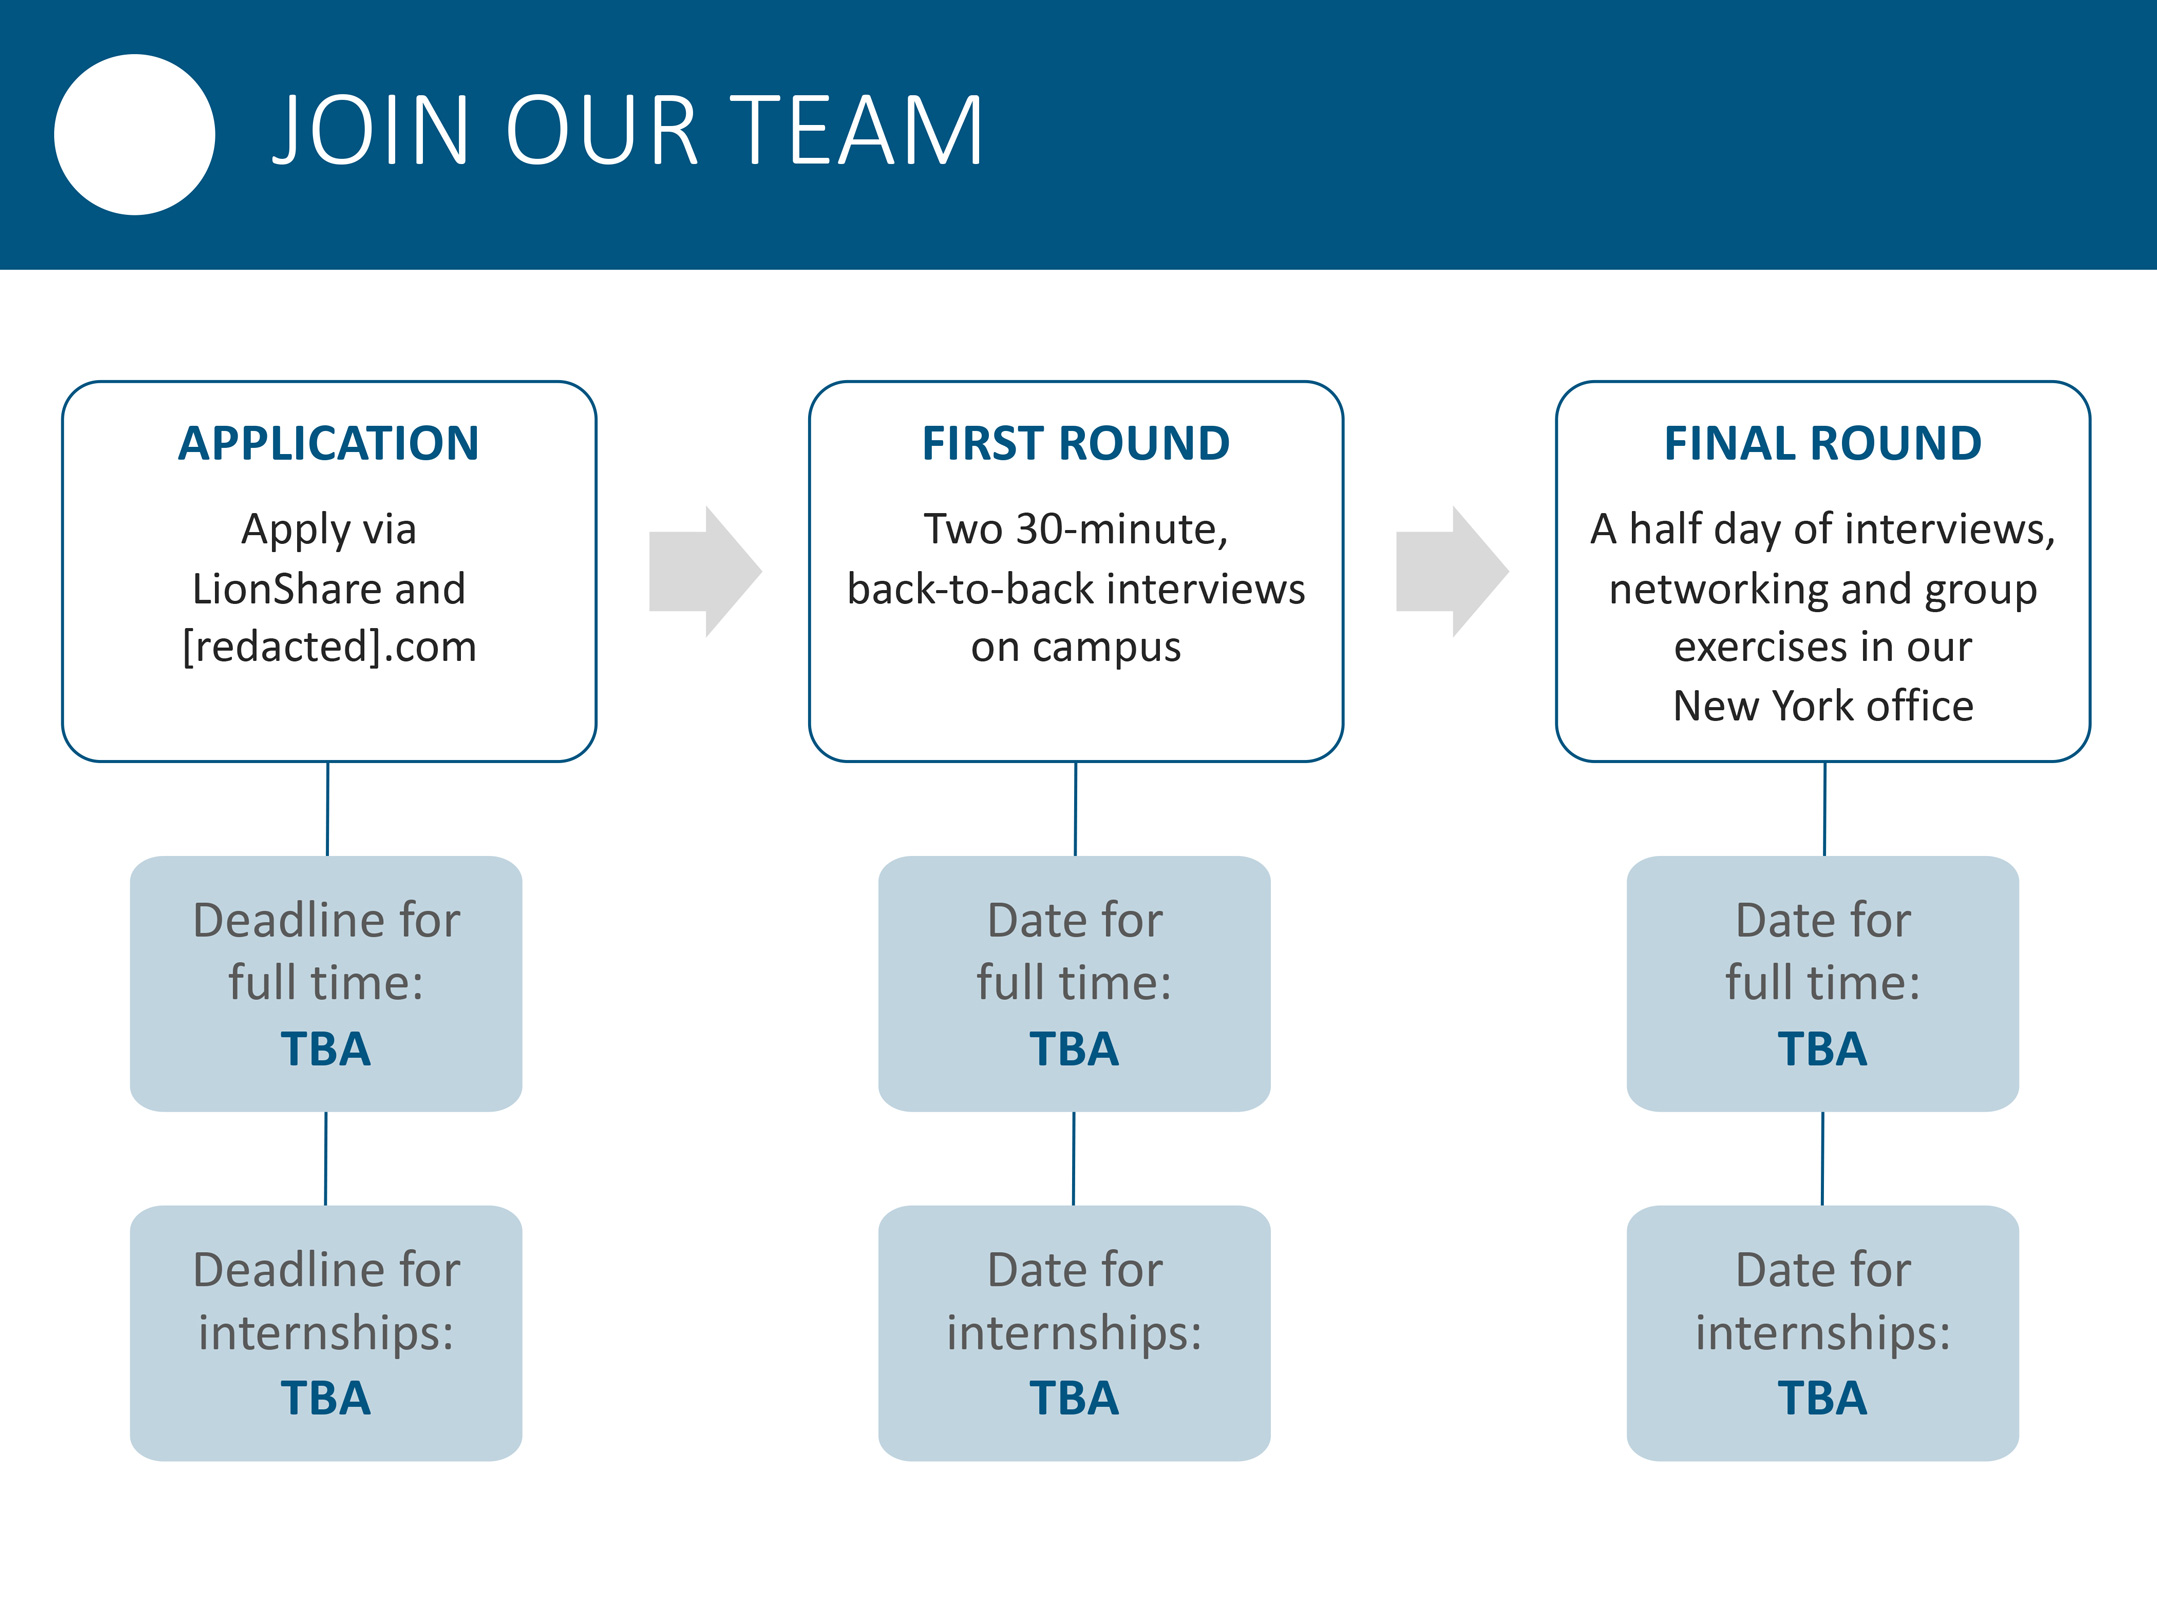 Slide for an options-trading firm. The slide is a flow chart outlining the interview process, with descriptions and deadlines for the application process and two rounds of interviews.